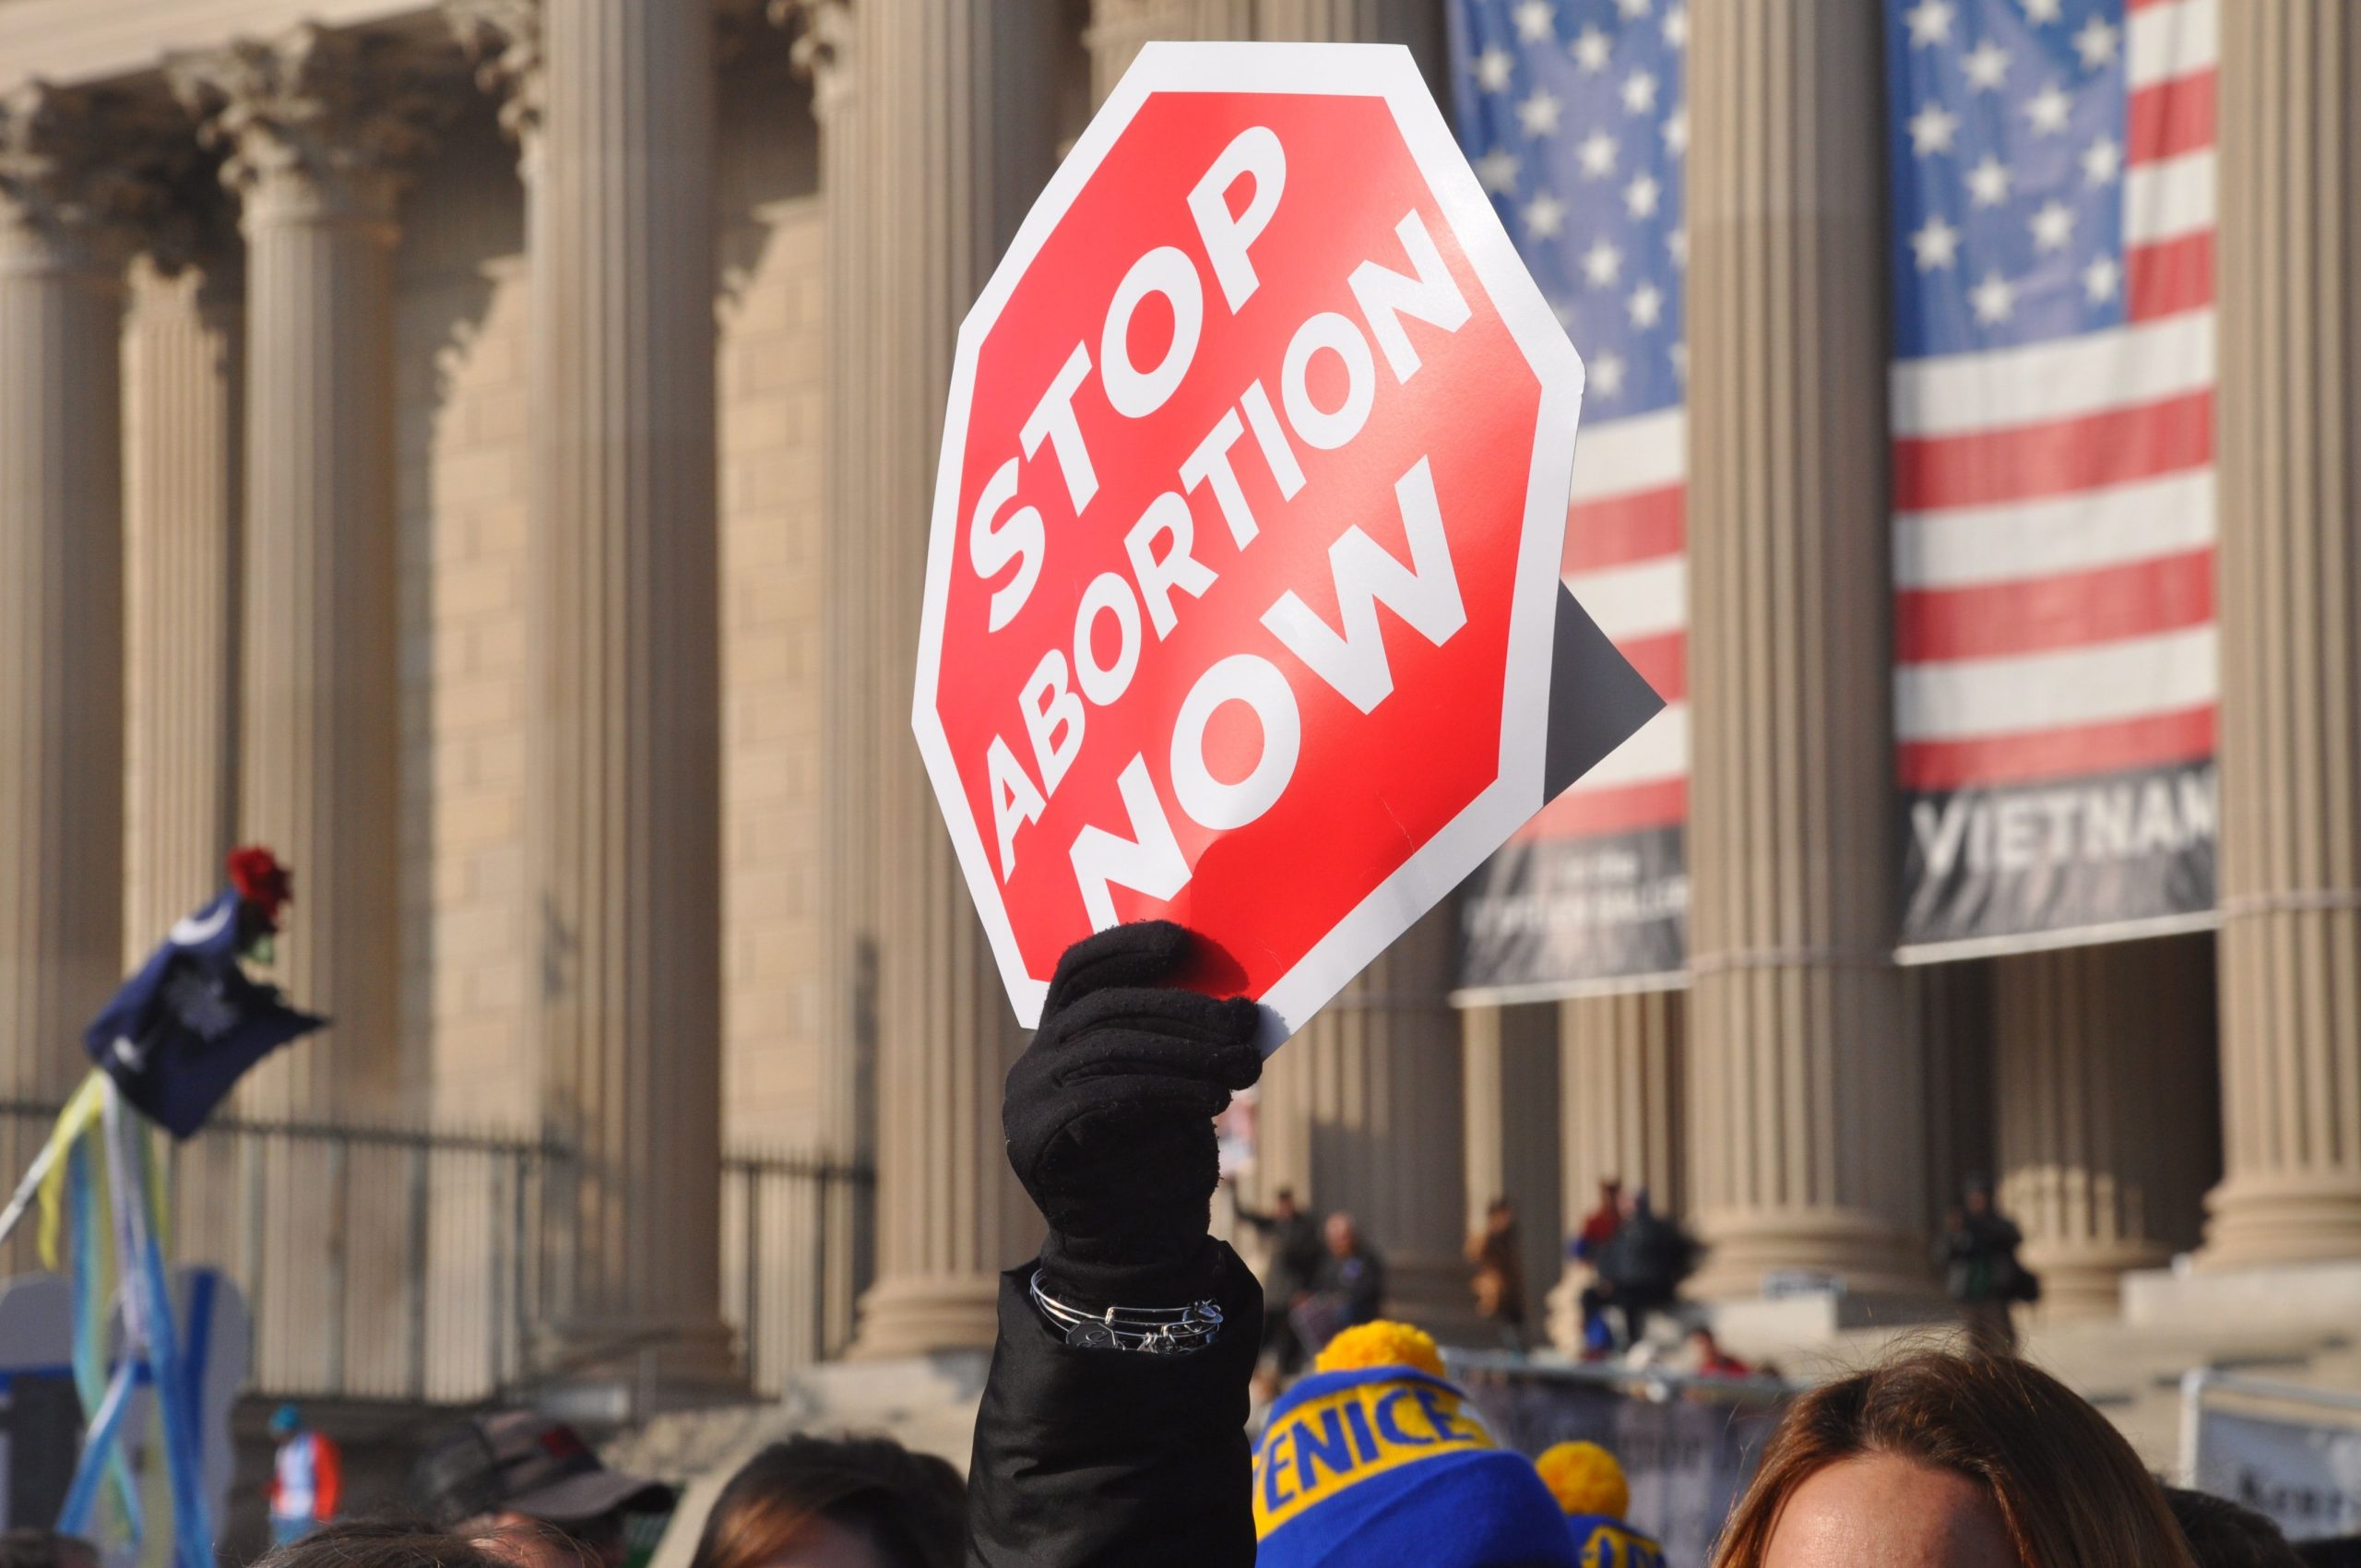 How Silicon Valley responded to Roe v Wade overturning